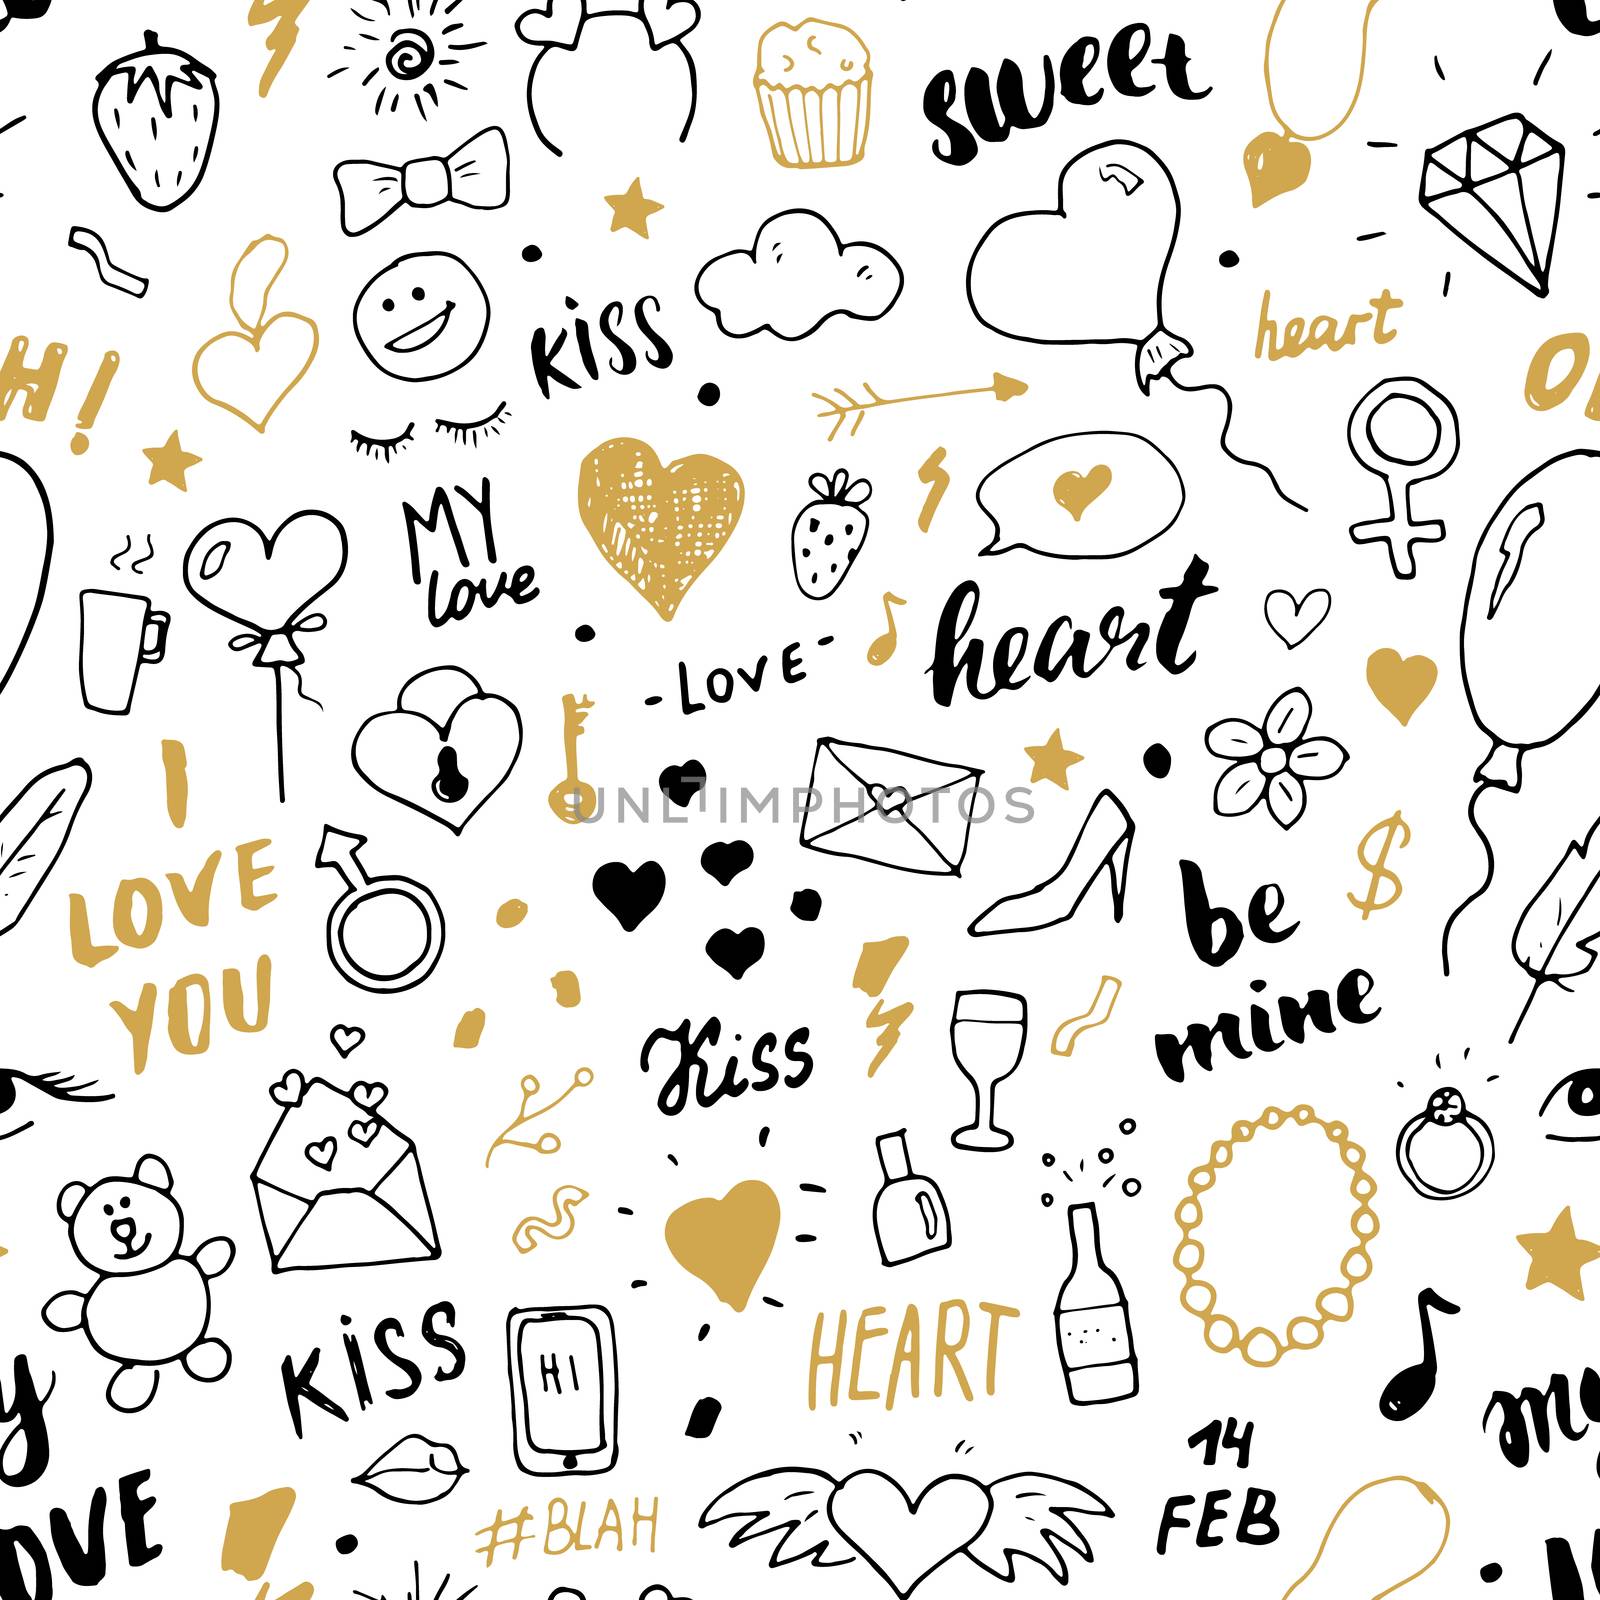 Love and Valentine Day seamless pattern vector illustration. Hand drawn sketched doodle romantic symbols background.